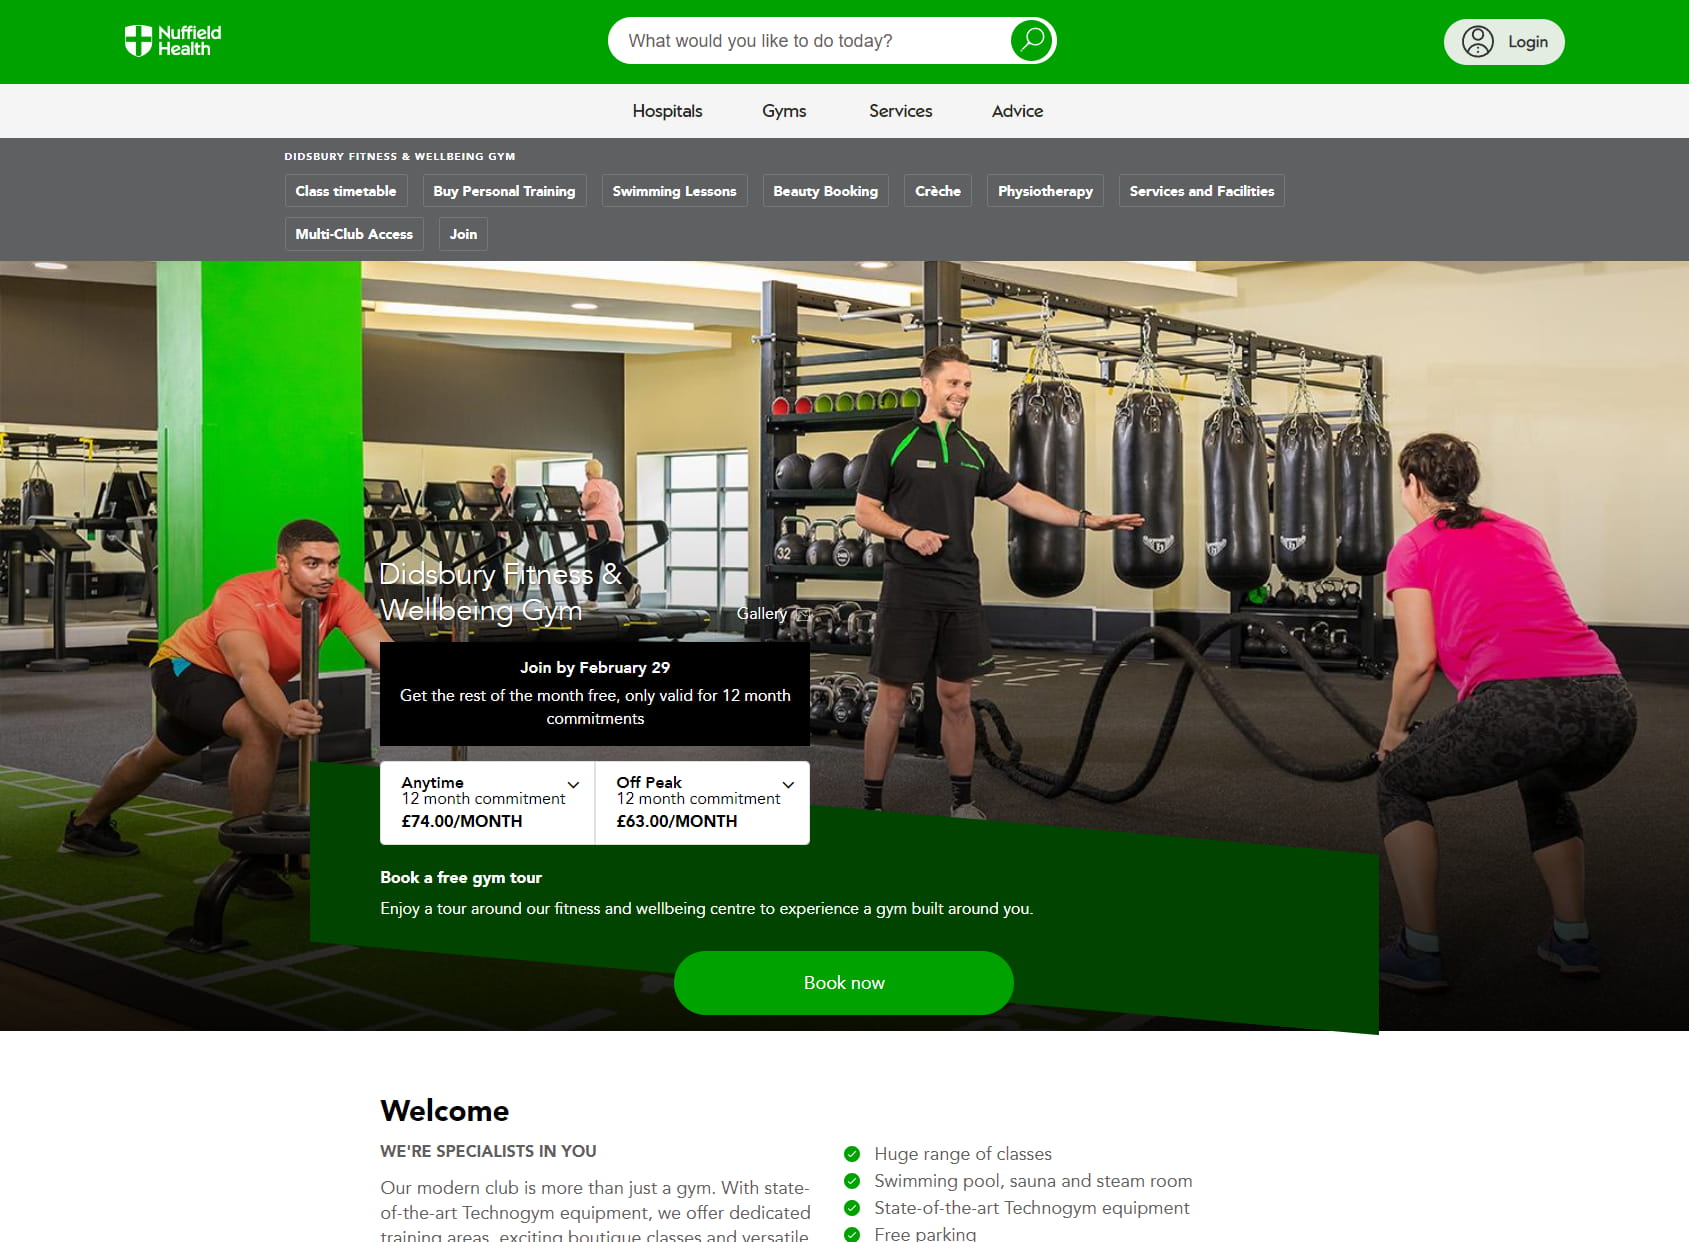 Nuffield Health Didsbury Fitness and Wellbeing Centre